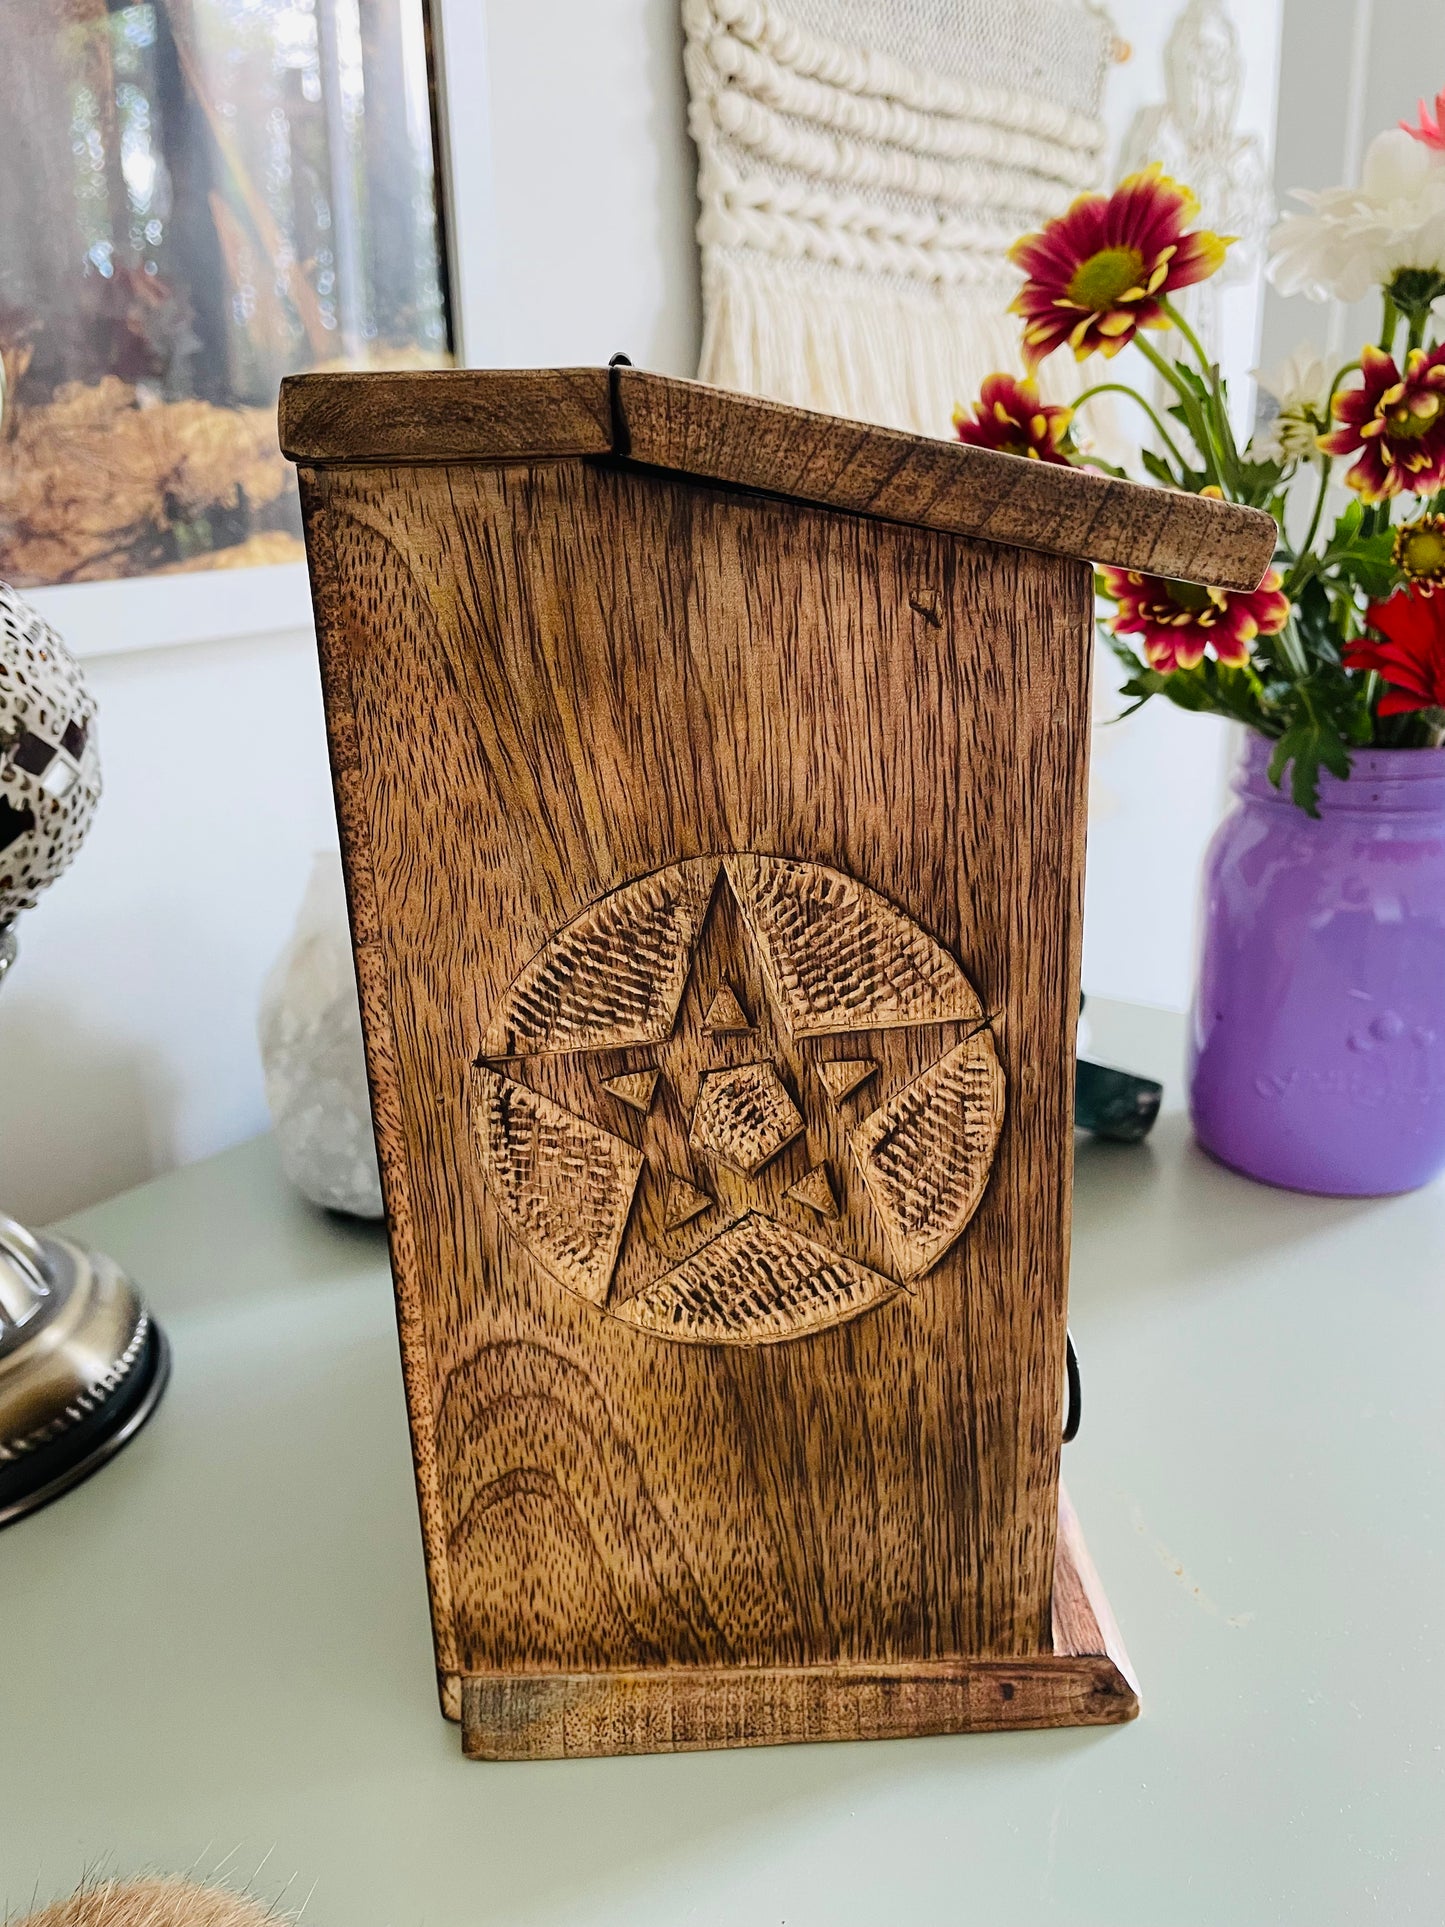 Wooden Witch Drawers Pentacle